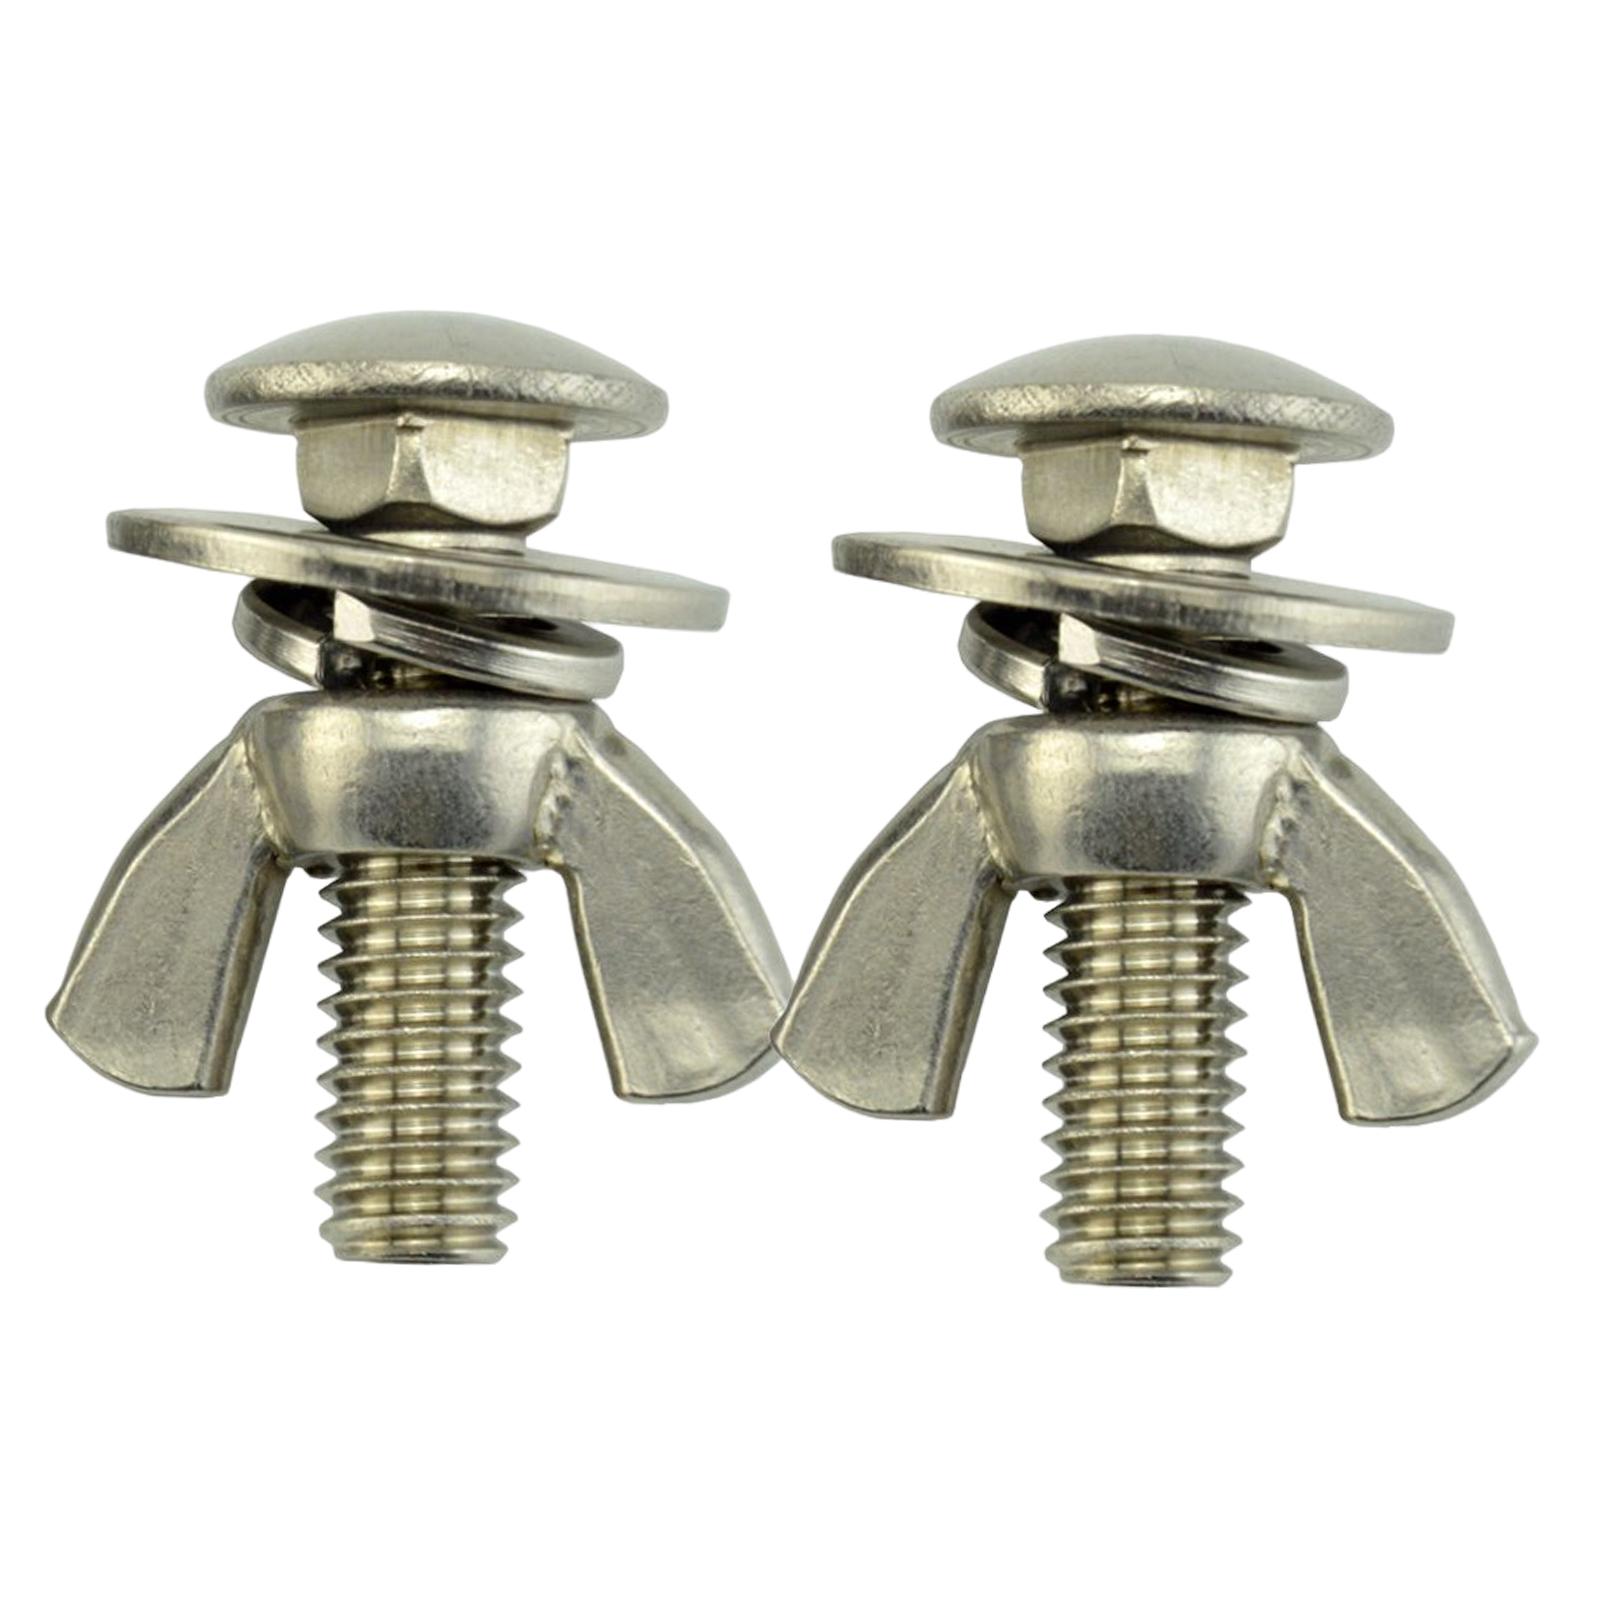 2Pcs Tech Diving Butterfly Screw s Wing Nuts Thumb Screws Fastener 316 Stainless for Backplates Accessories, Rust Resistance - image 2 of 5